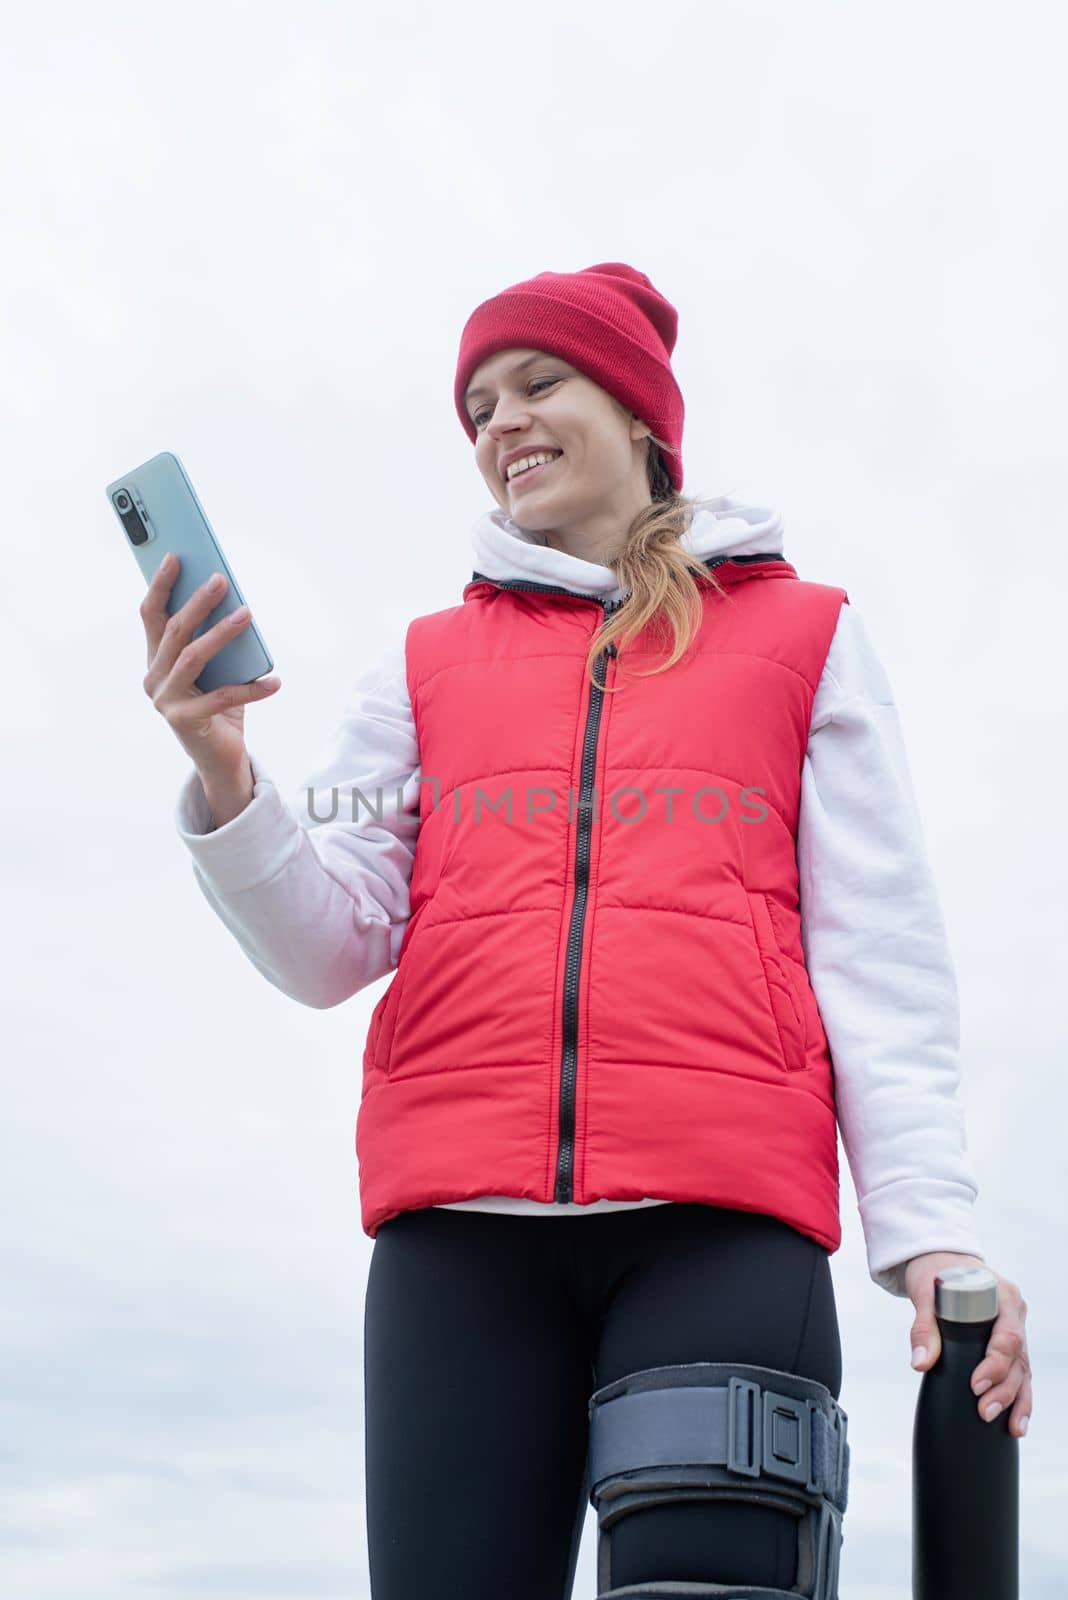 Woman wearing knee brace or orthosis after leg surgery walking in the park using smartphone by Desperada